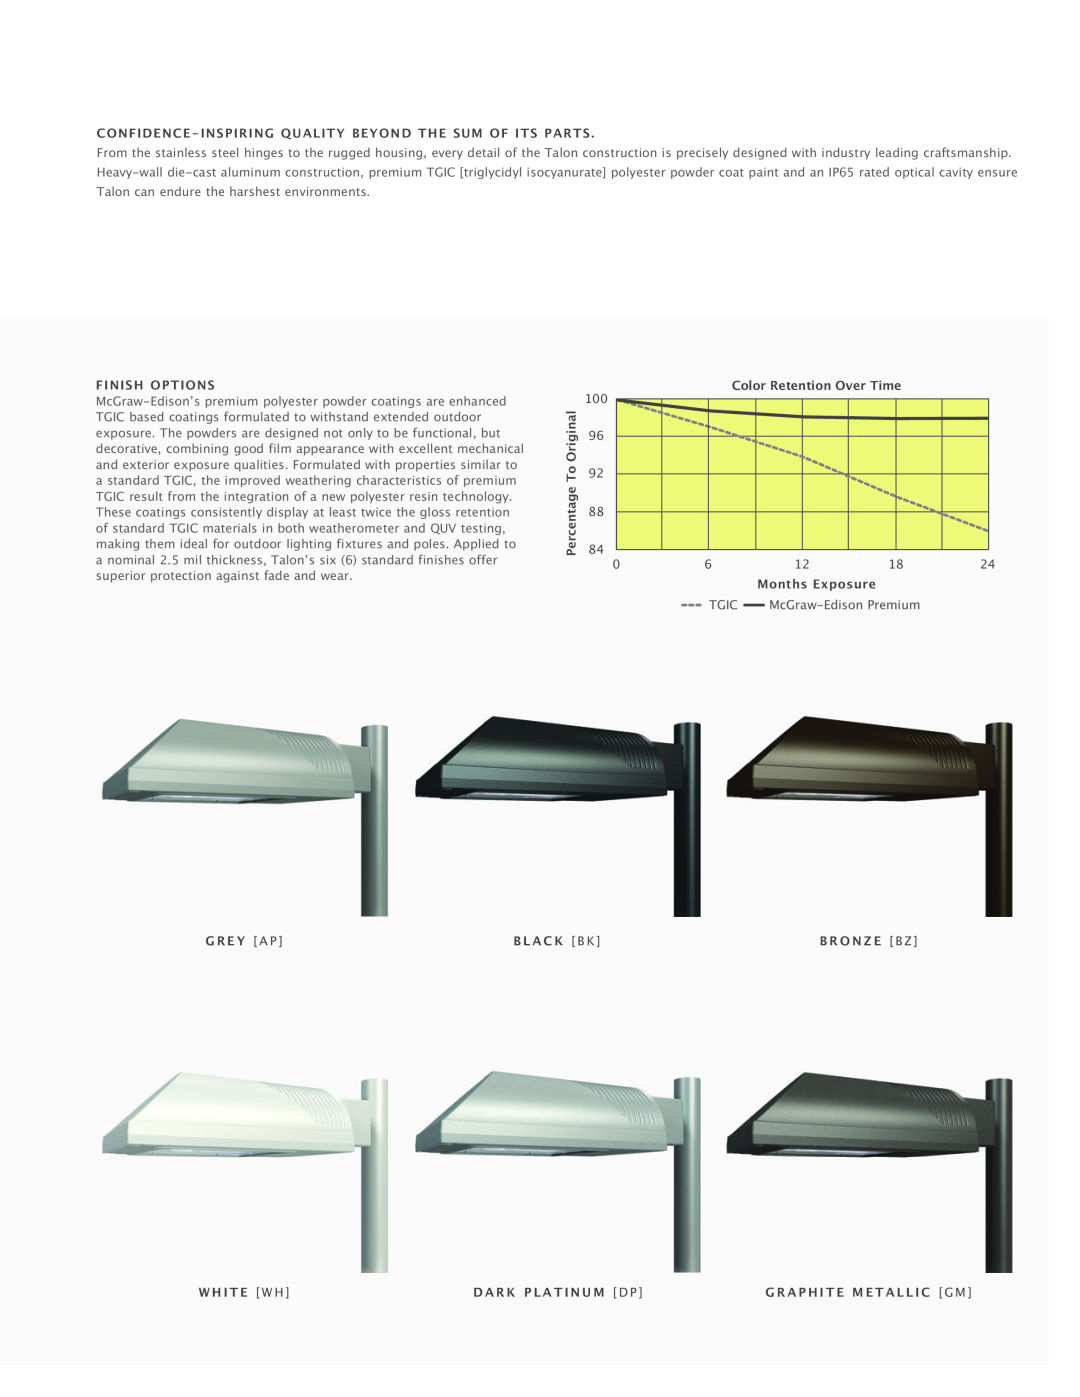 Cooper Lighting Architectural Area Luminaire manual Confidence-Inspiring Quality Beyond The Sum Of Its Parts, Tgic 